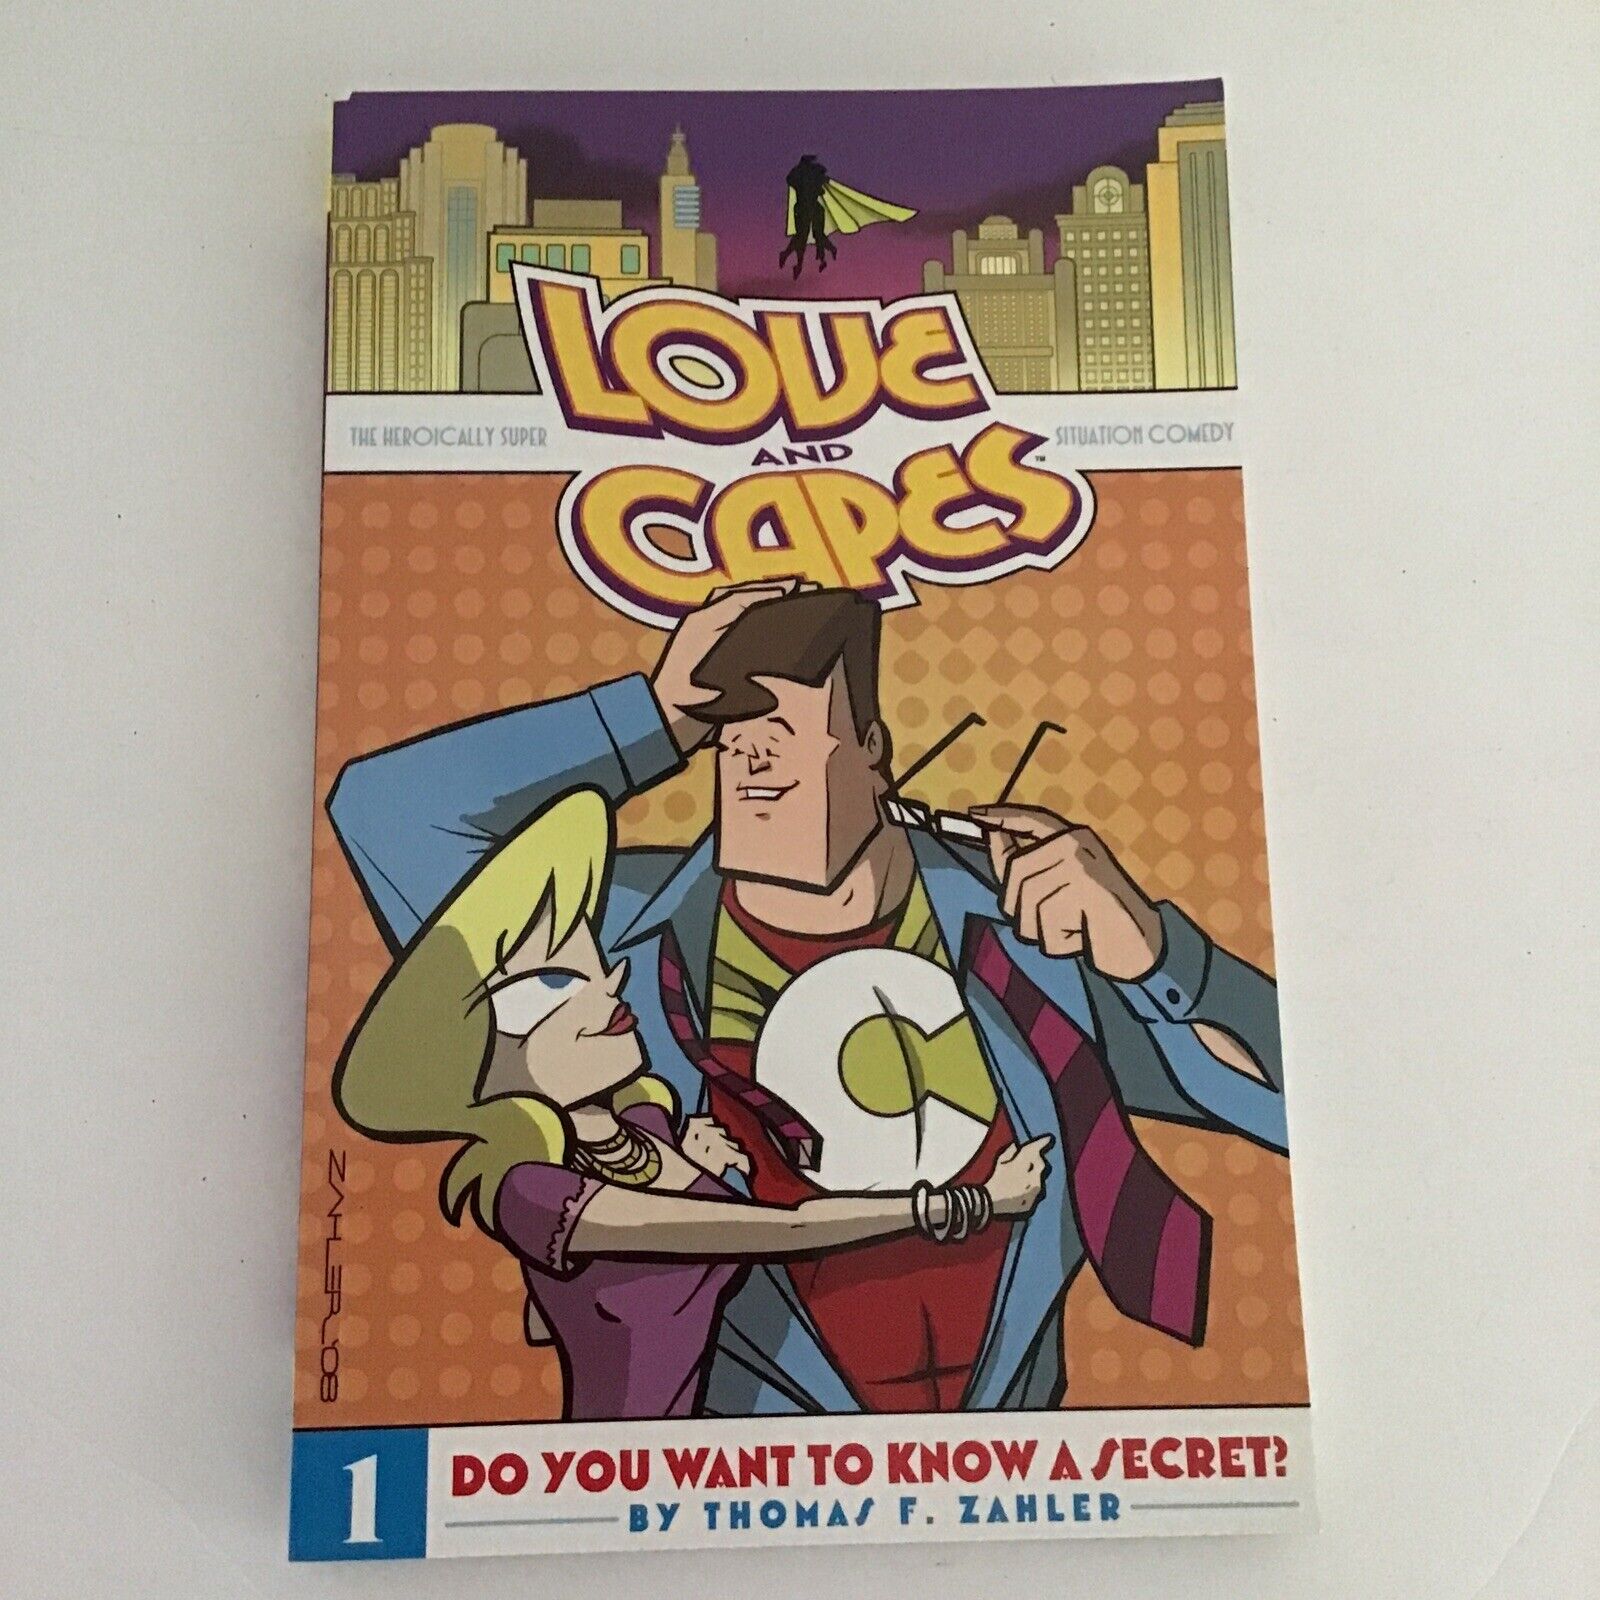 Love and Capes: Do You Want to Know A Secret? Vol. 1 #1-6 by Thomas F. Zahler